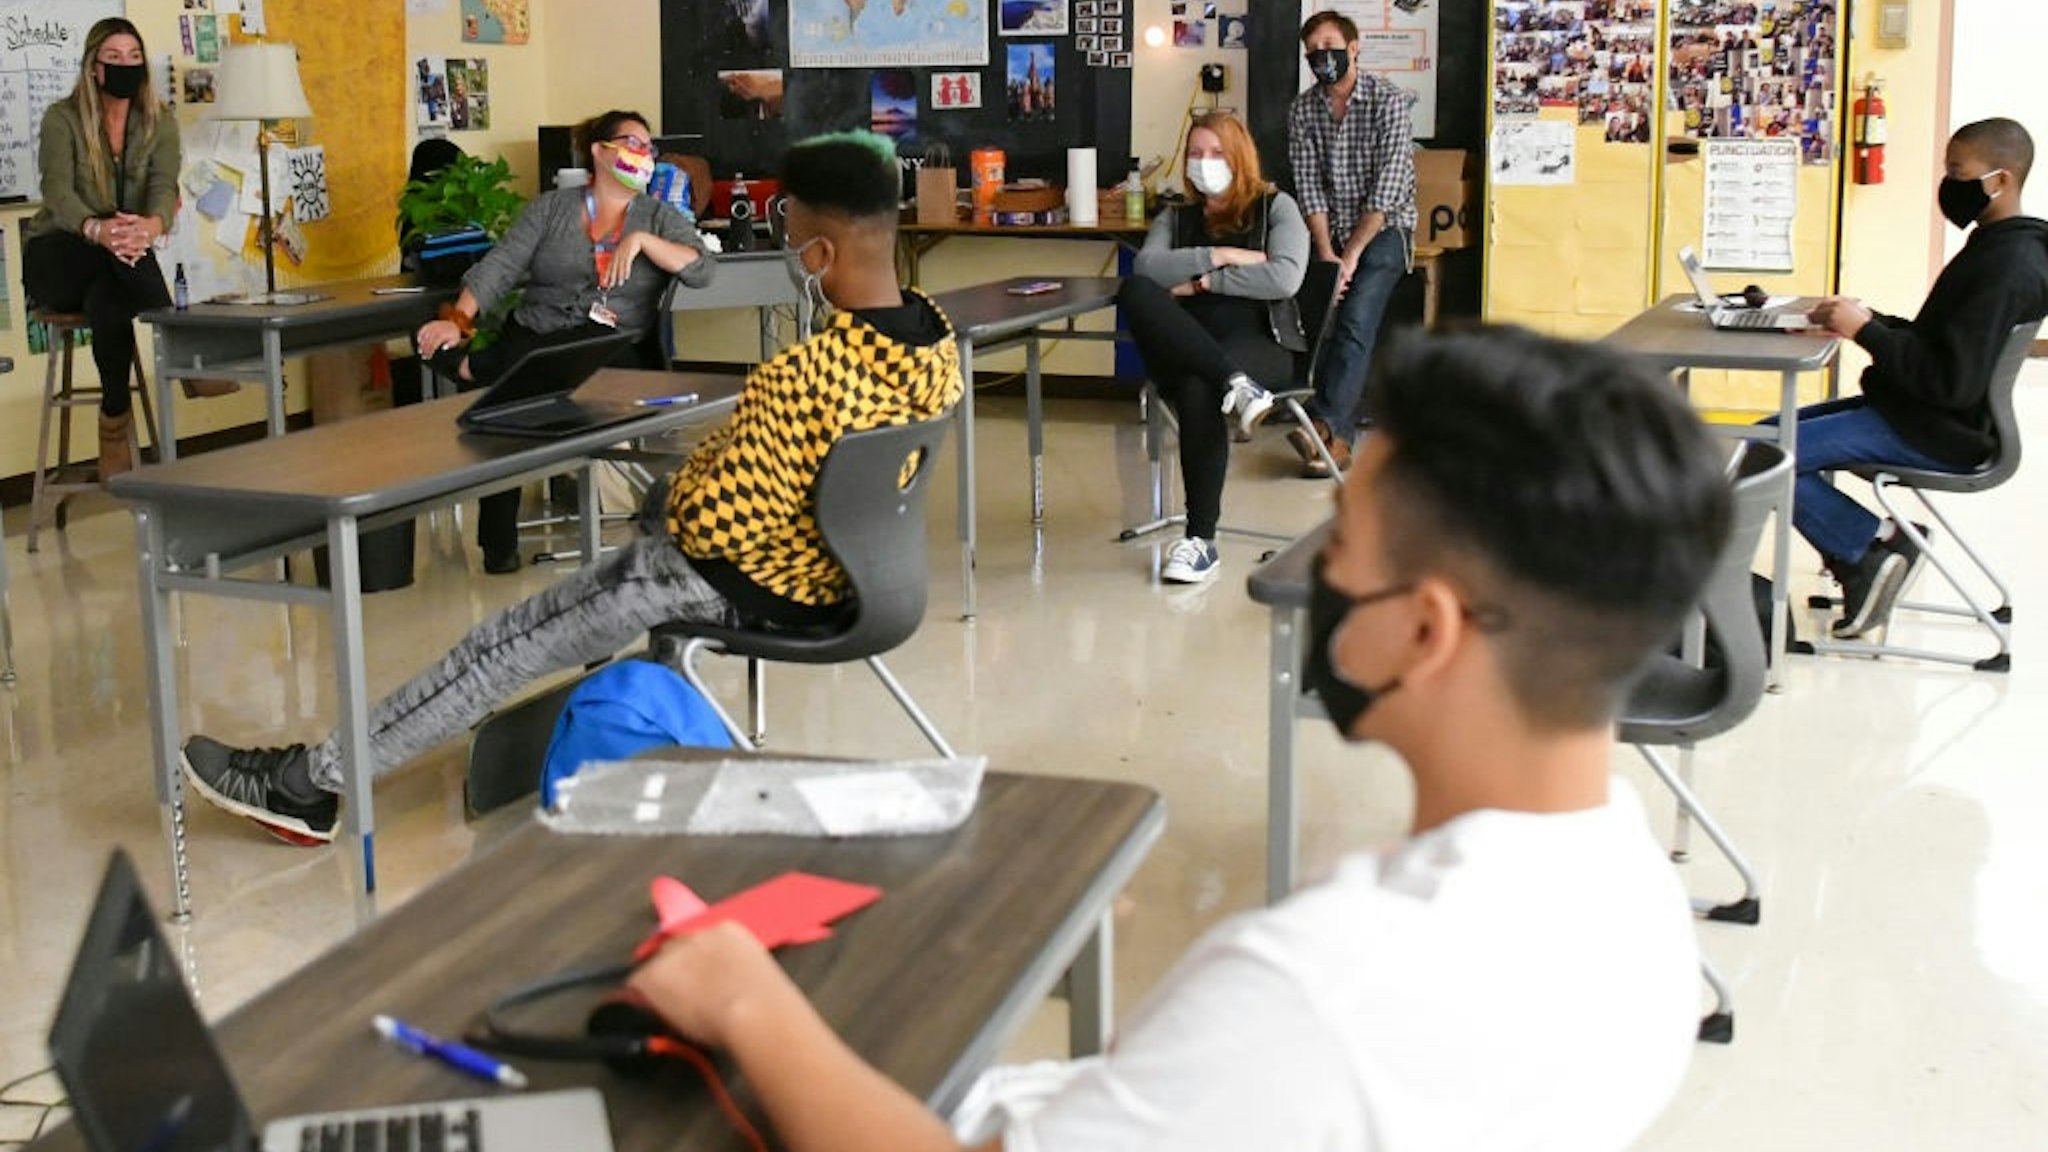 LOS ANGELES, CALIFORNIA - APRIL 27: Students attend in-person instruction at Hollywood High School on April 27, 2021 in Los Angeles, California.